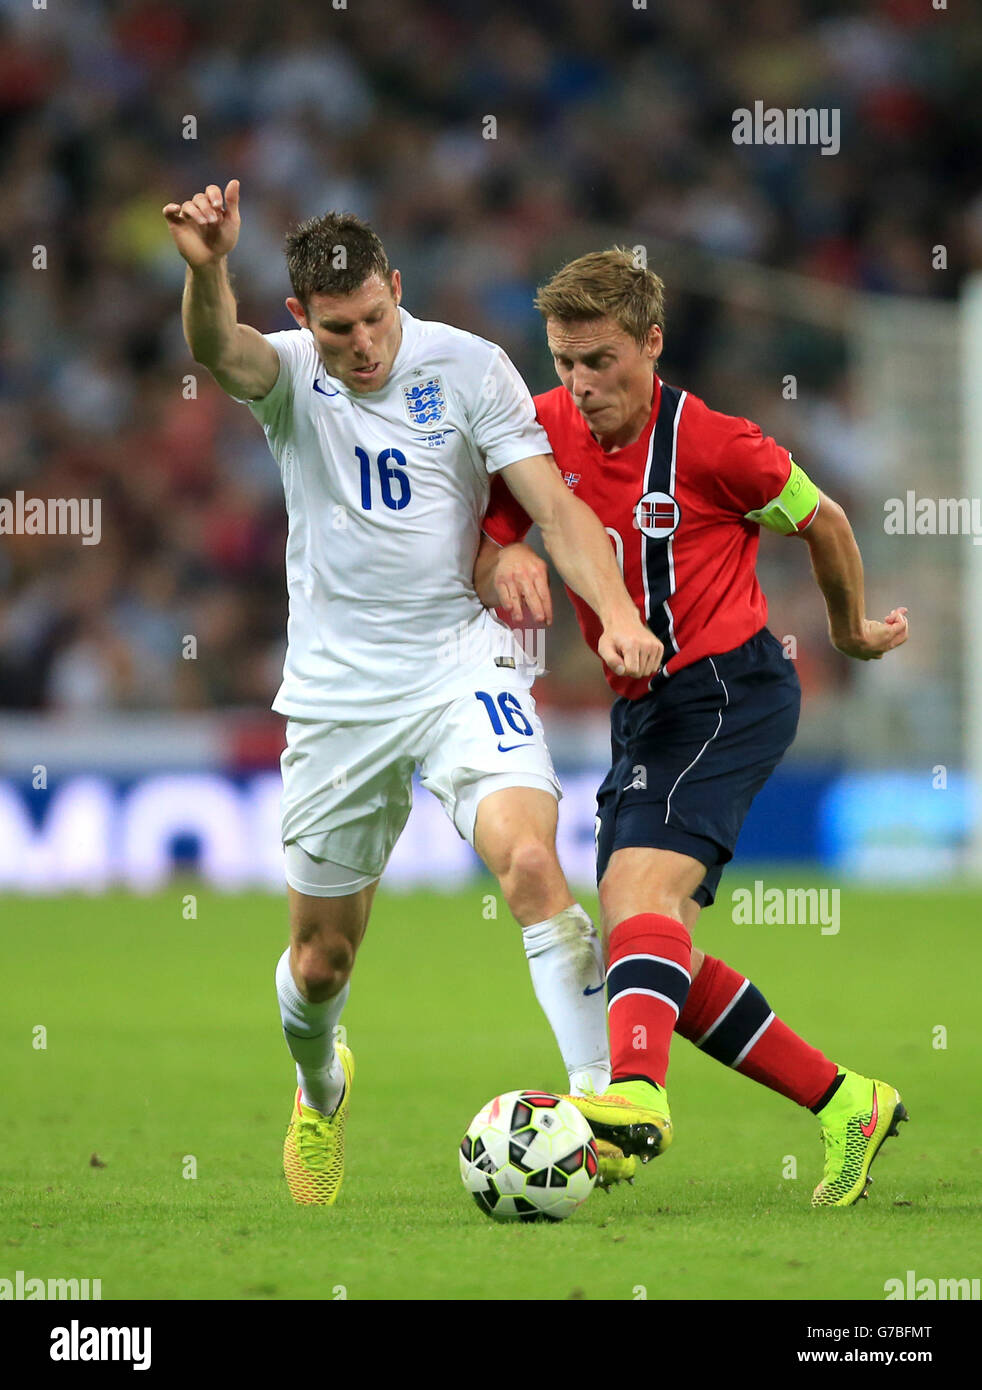 England's James Milner (left) and Norway's Per Skjelbred (right) battle for the ball during the International Friendly at Wembley Stadium, London. PRESS ASSOCIATION Photo. Picture date: Wednesday September 3, 2014. See PA story SOCCER England. Photo credit should read: Nick Potts/PA Wire. Stock Photo